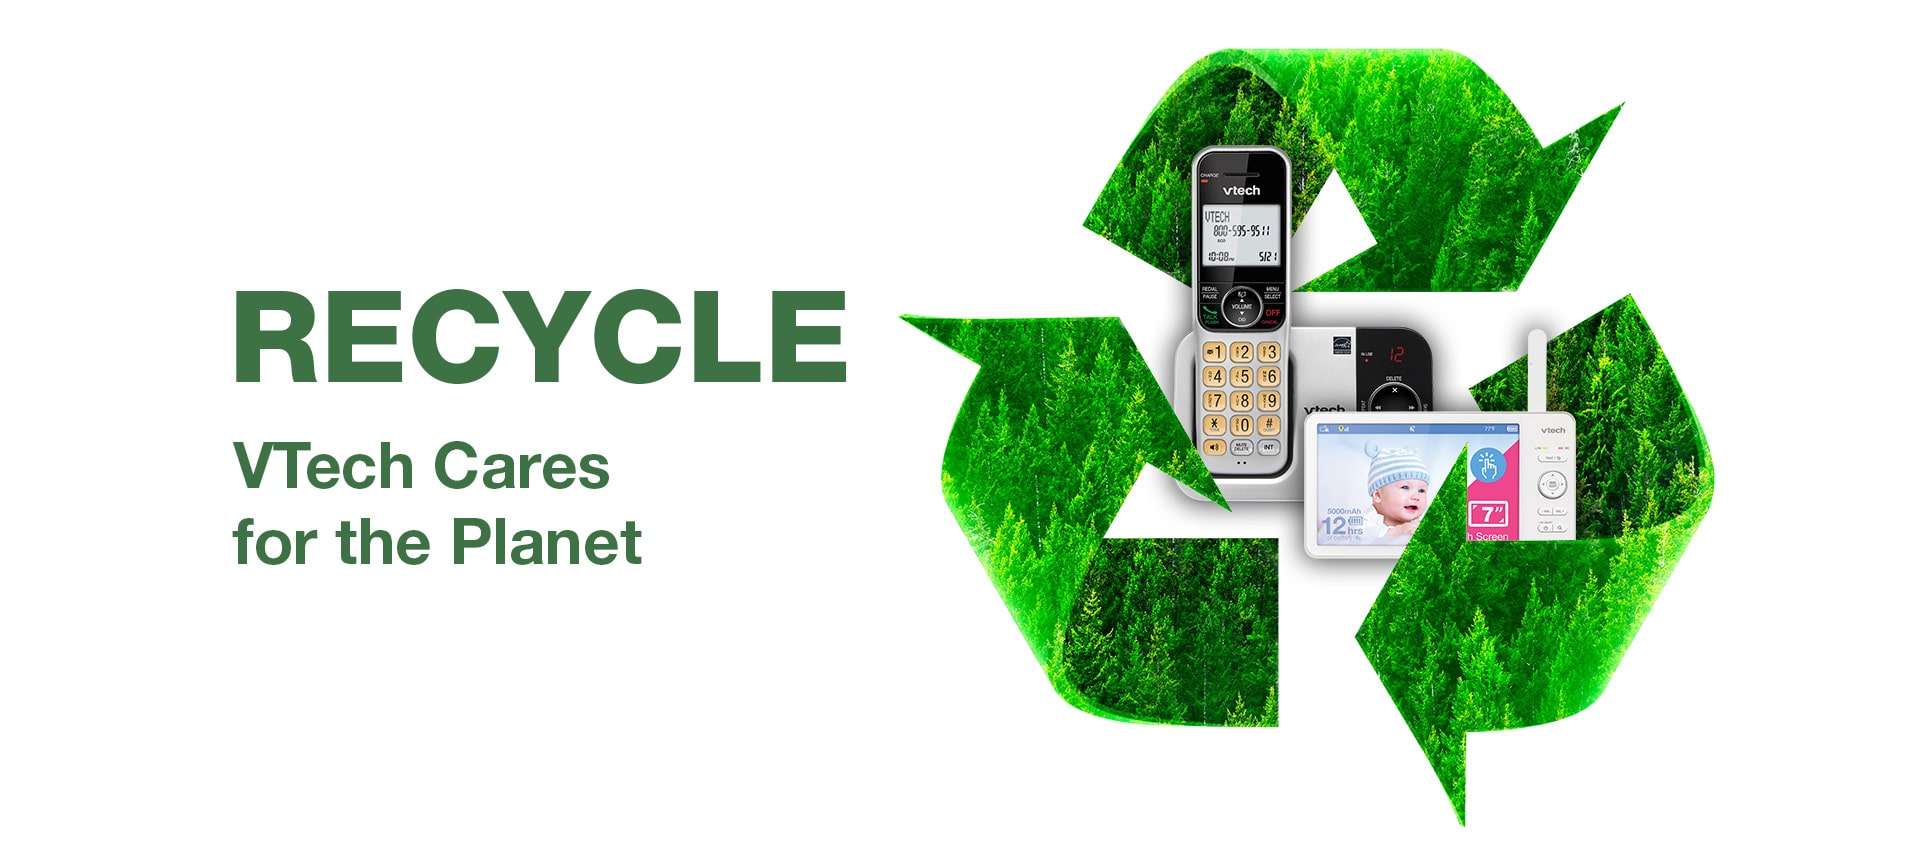 RECYCLE VTech Cares for the Planet